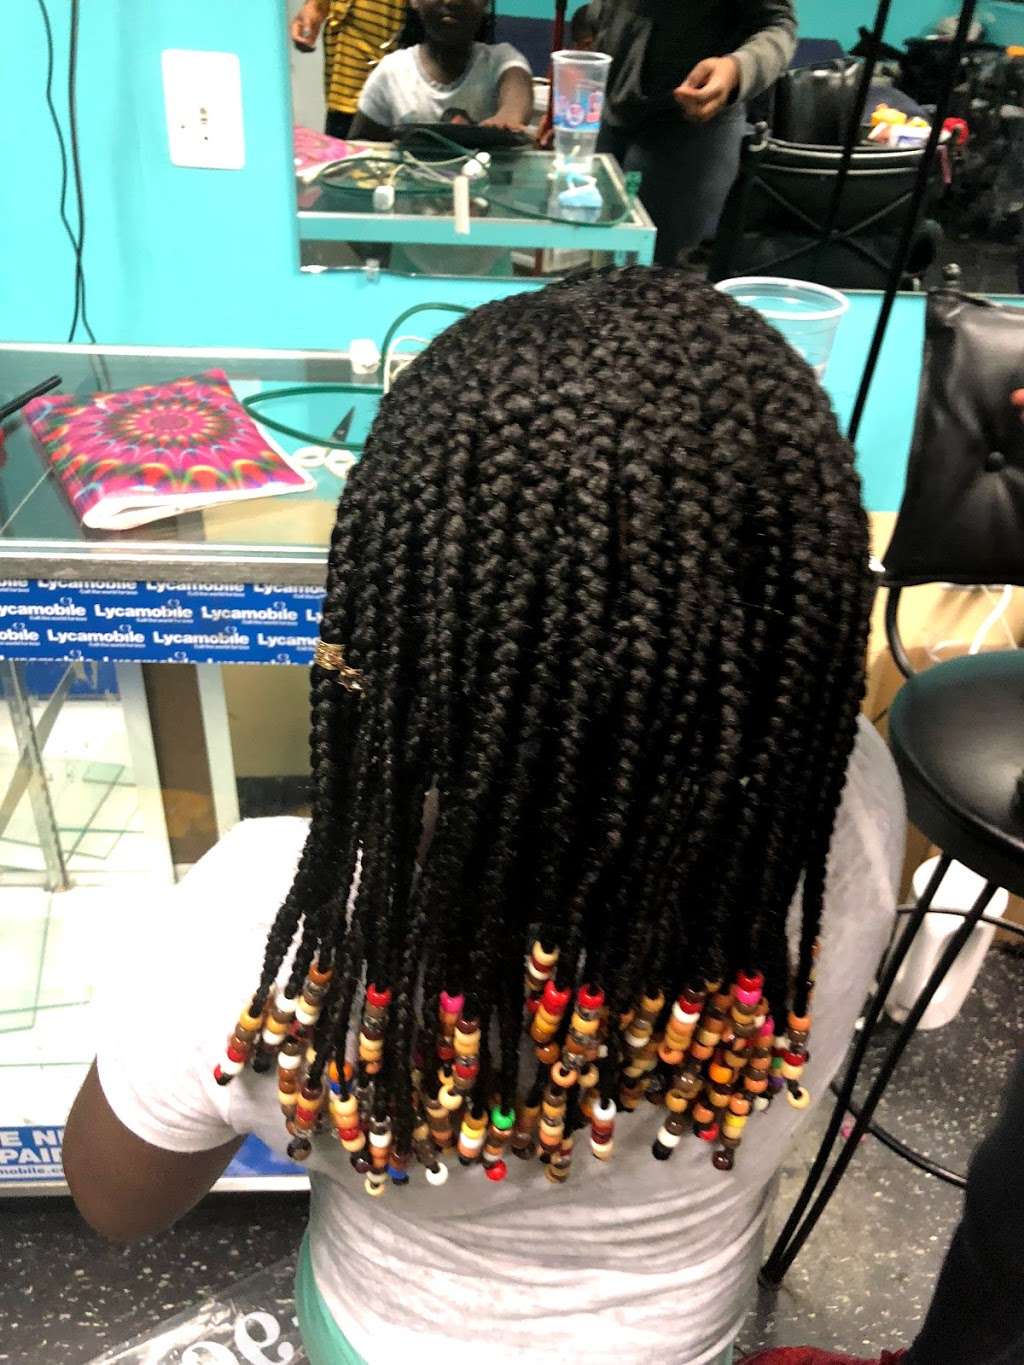 Mamie African Beauty | 334 E 103rd St, Chicago, IL 60628 | Phone: (773) 992-6790